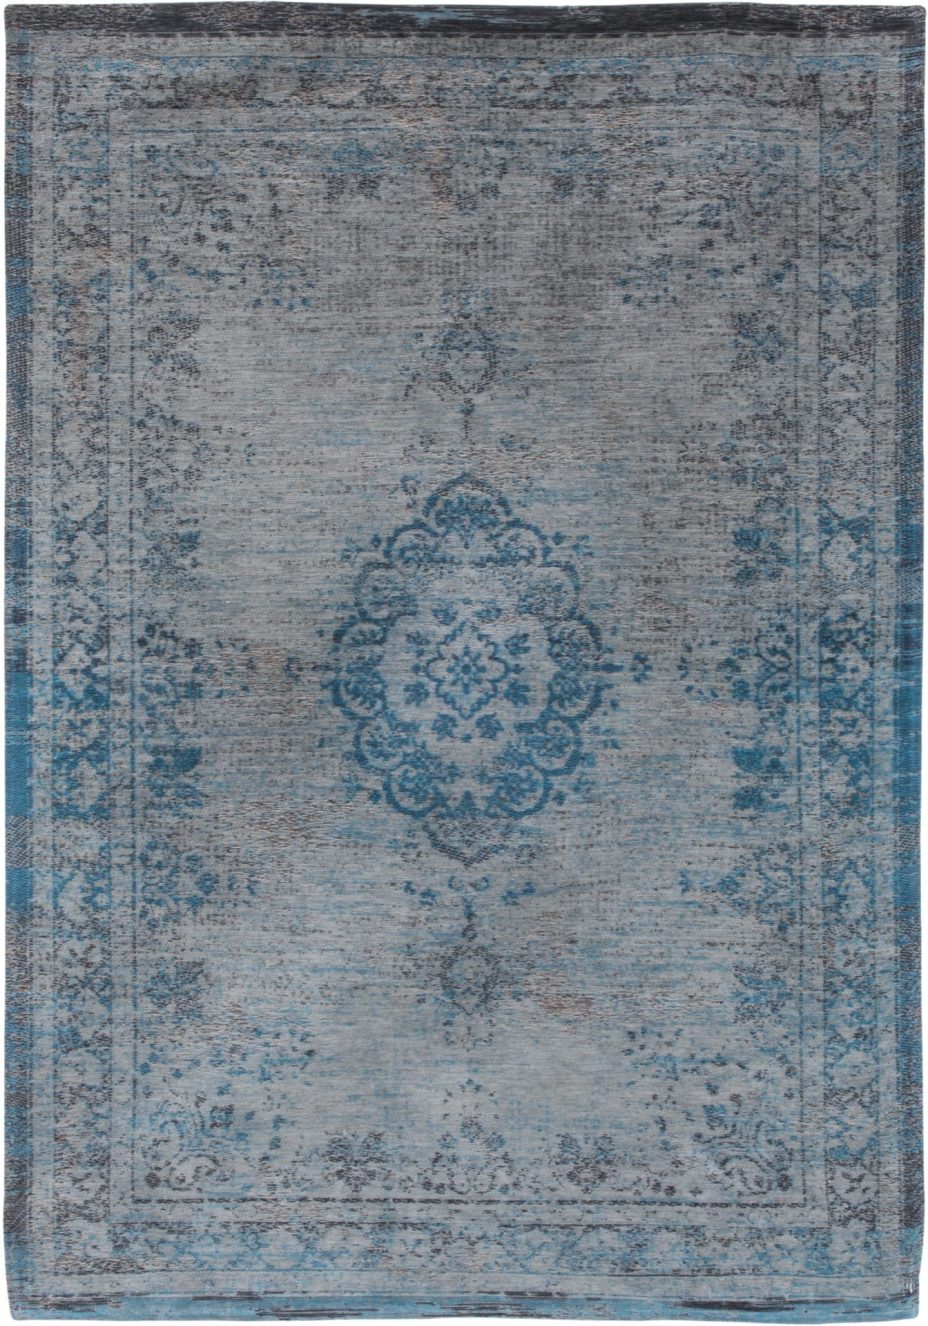 Fading World Collection Medallion Grey Turquoise 8255 rug by Louis De Poortere